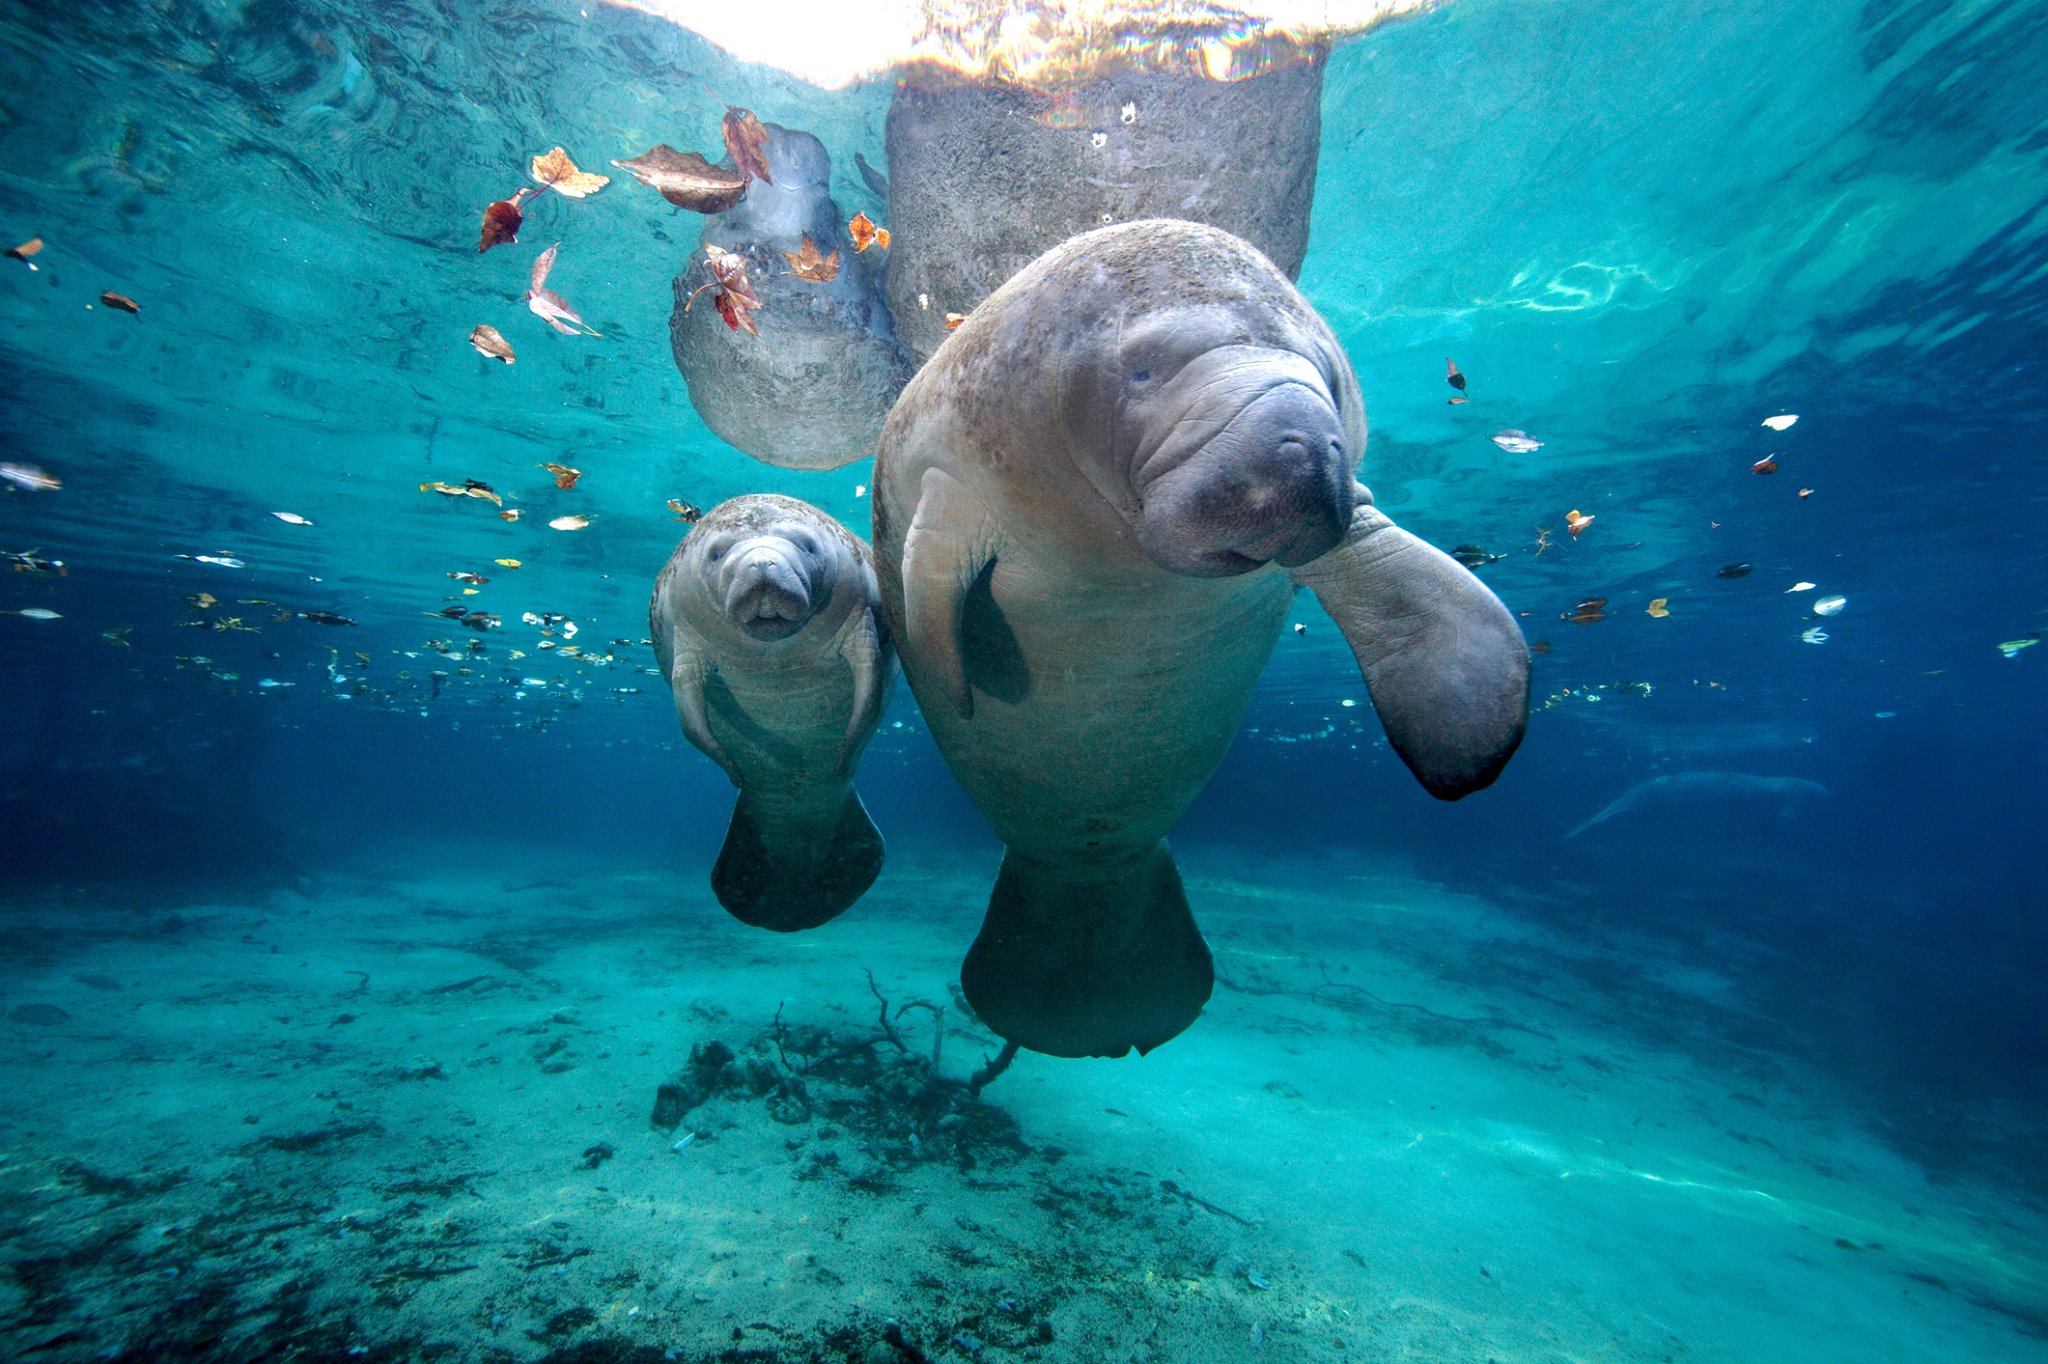 A Manatee and young Manatee in the ocean